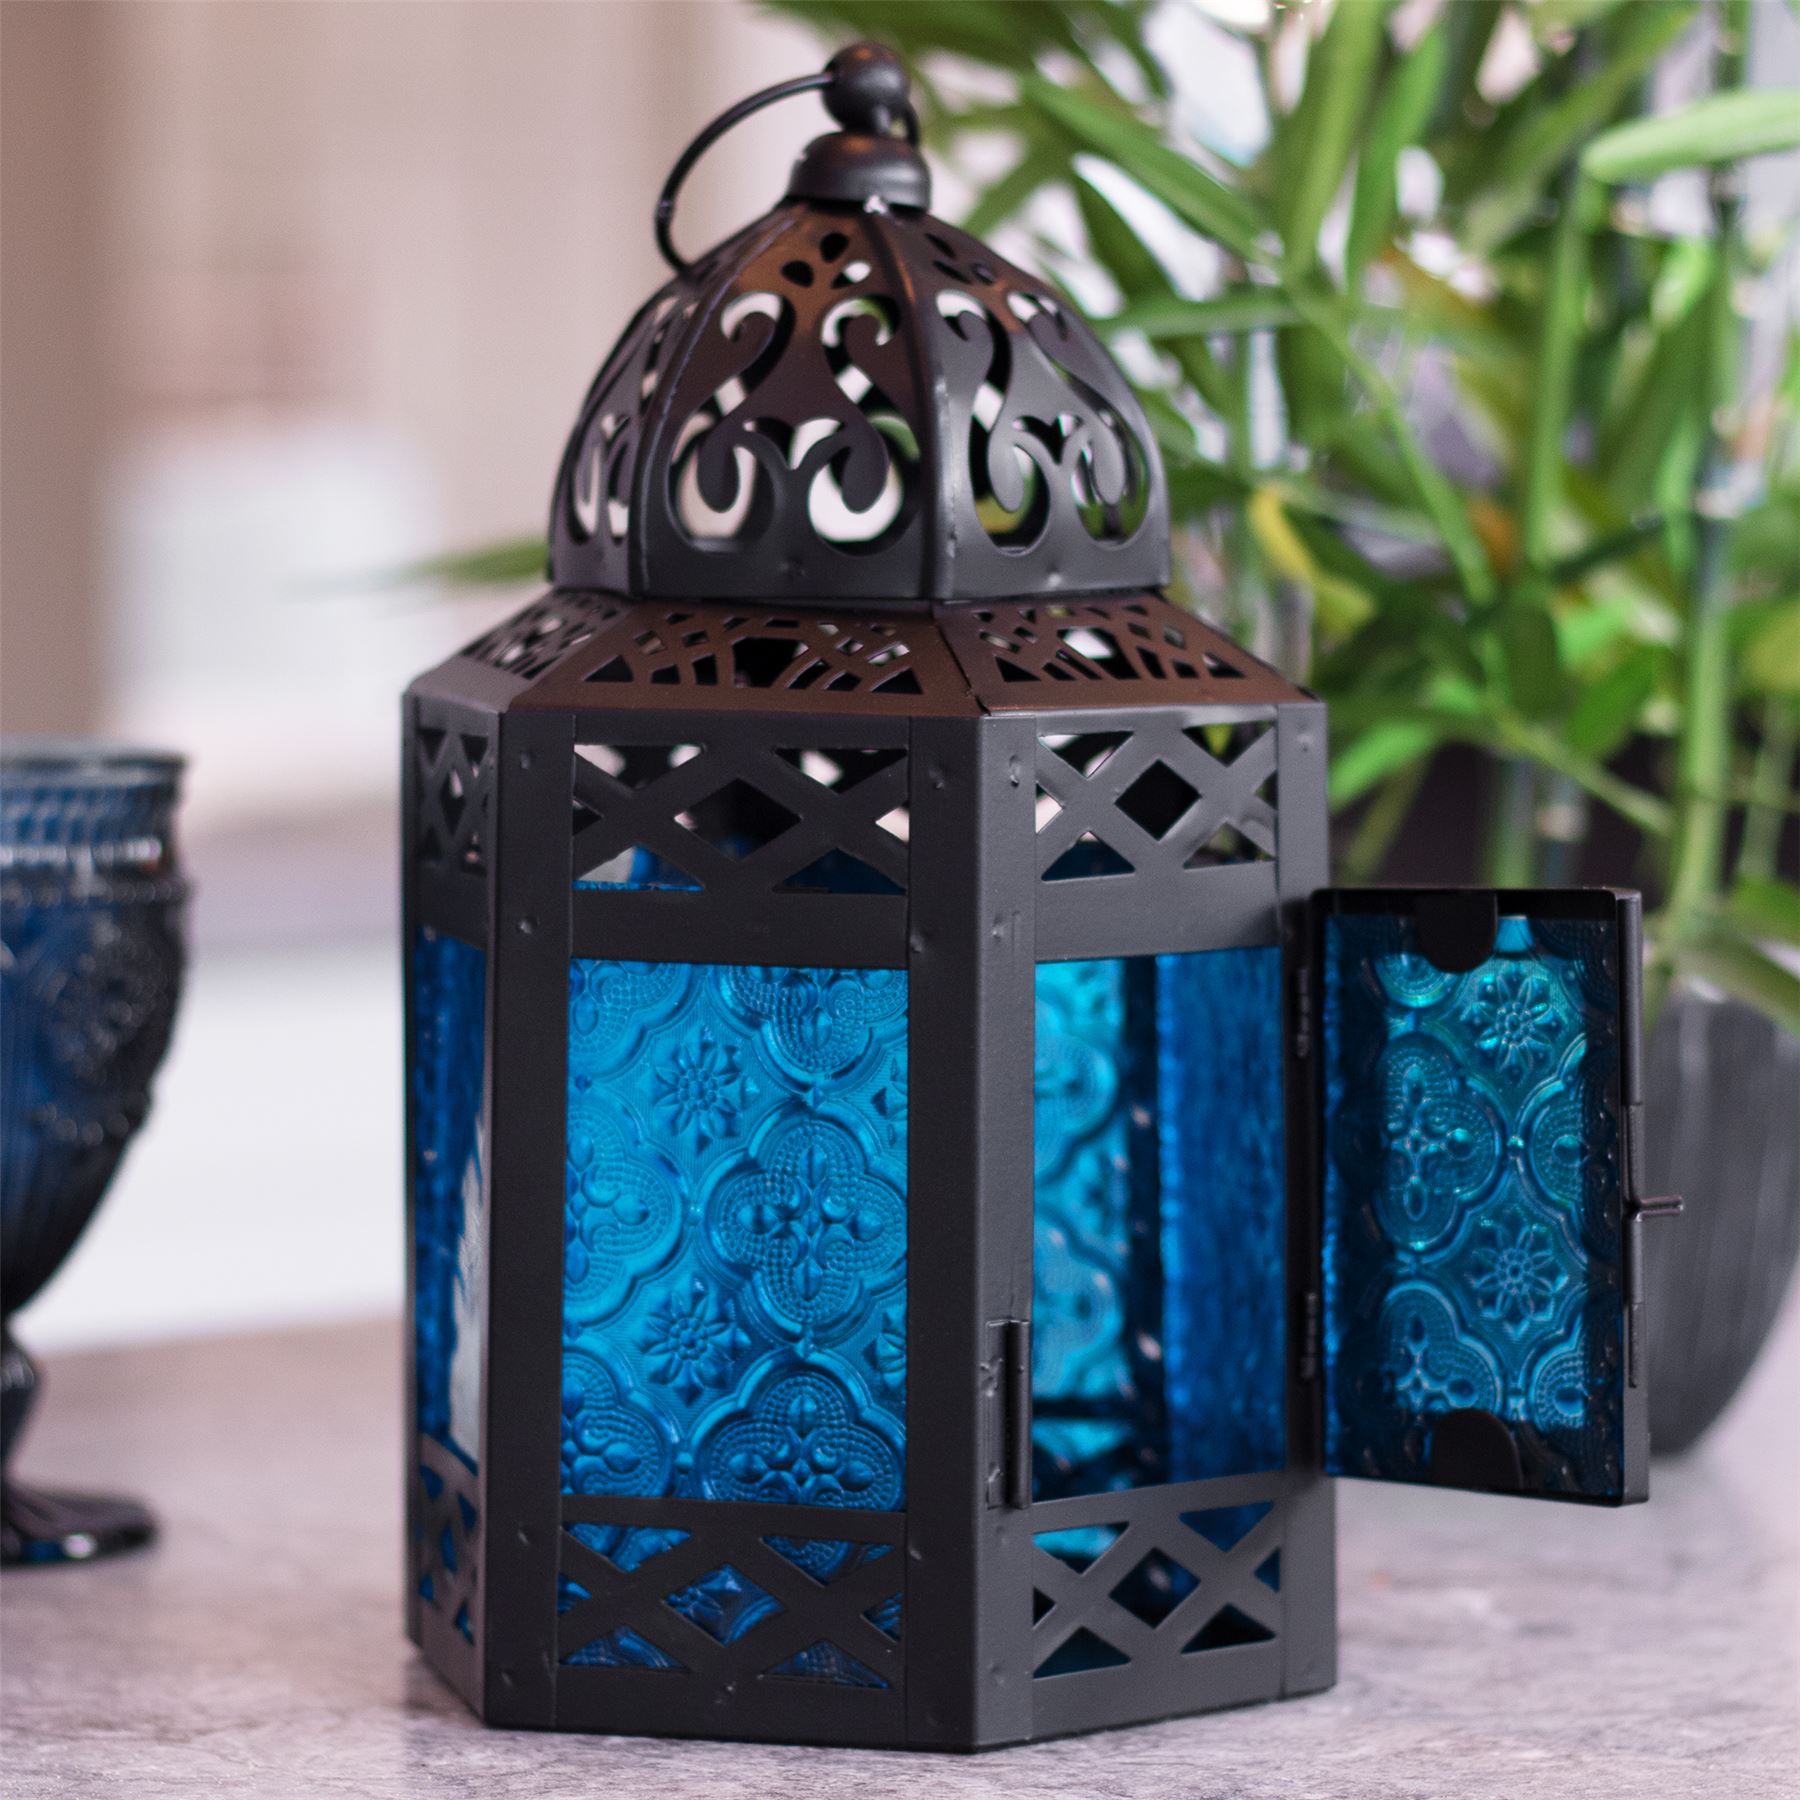 Blue Moroccan Hanging Lantern Tea Light Candle Holder in Vintage Style | M&W